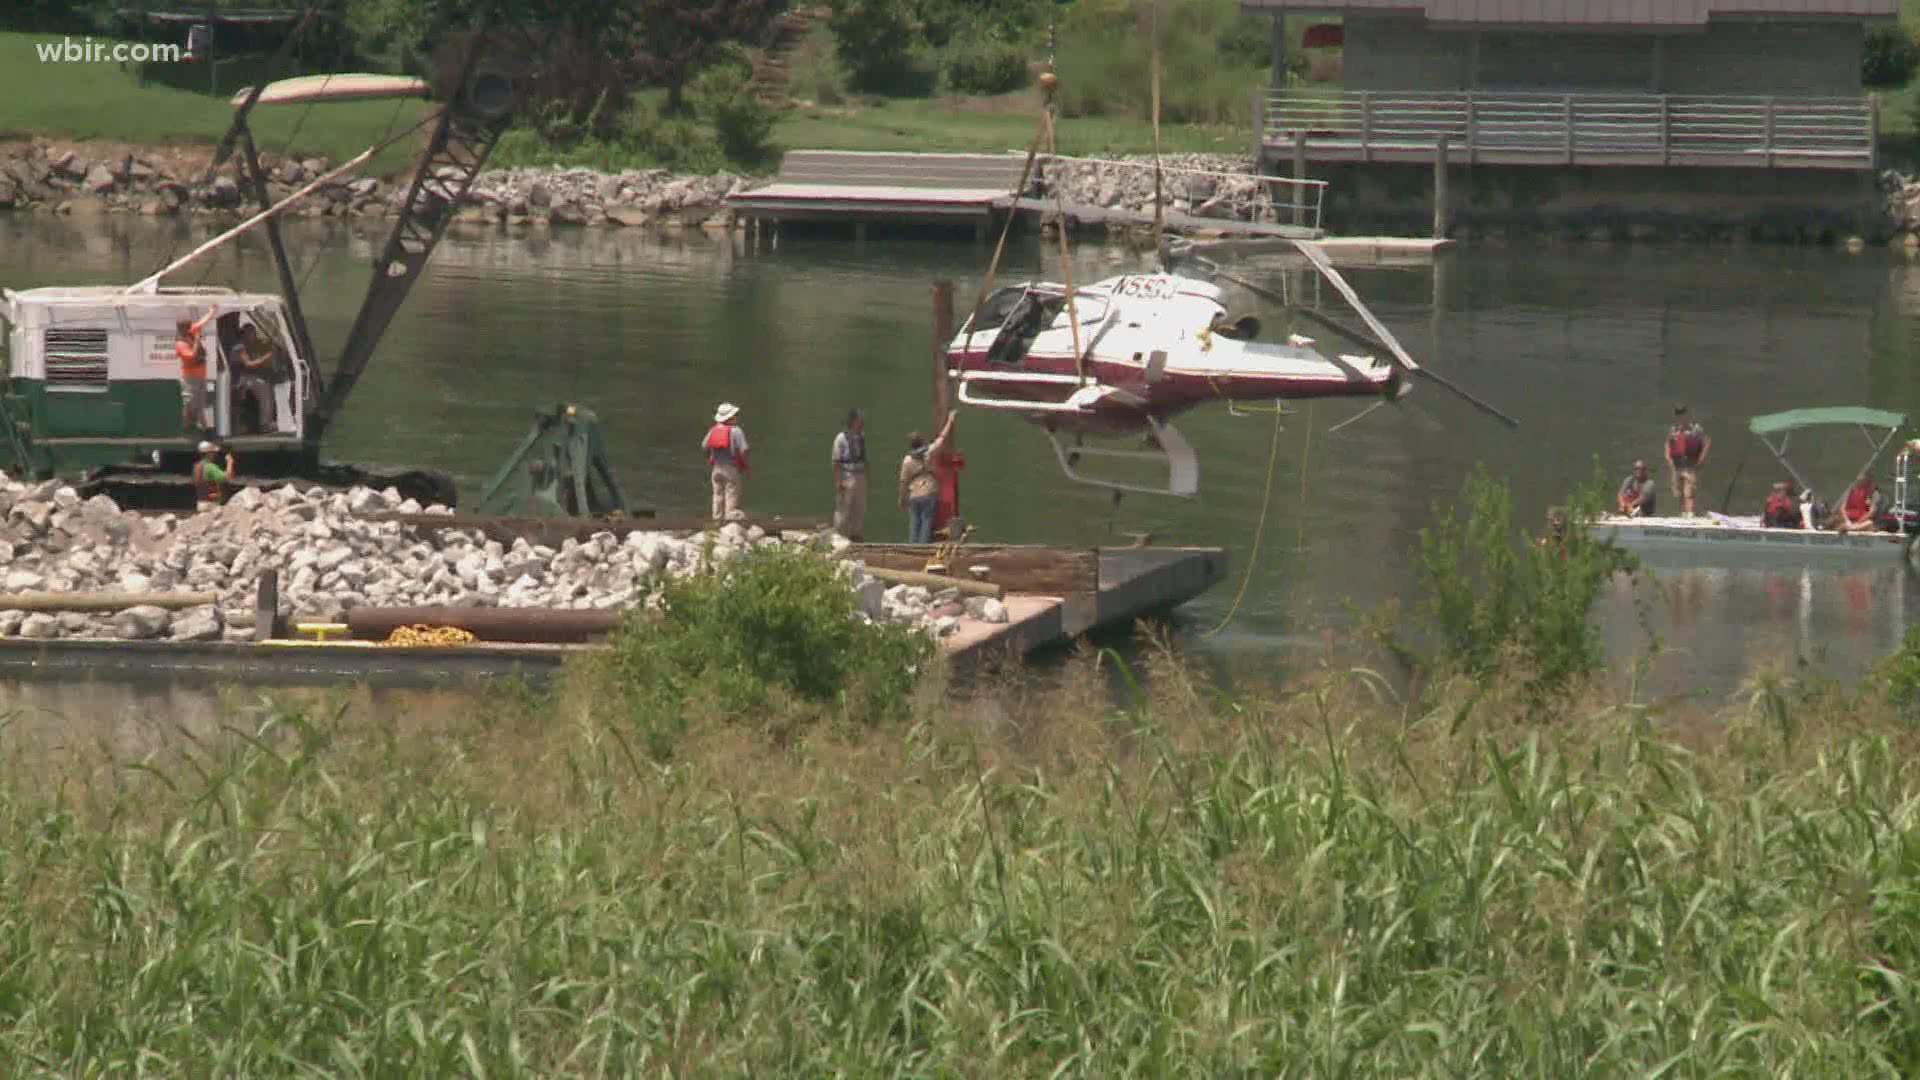 The 3,000-pound helicopter was recovered 435 feet from the landing pad in roughly 40 feet of water. The report says no fire or explosion.